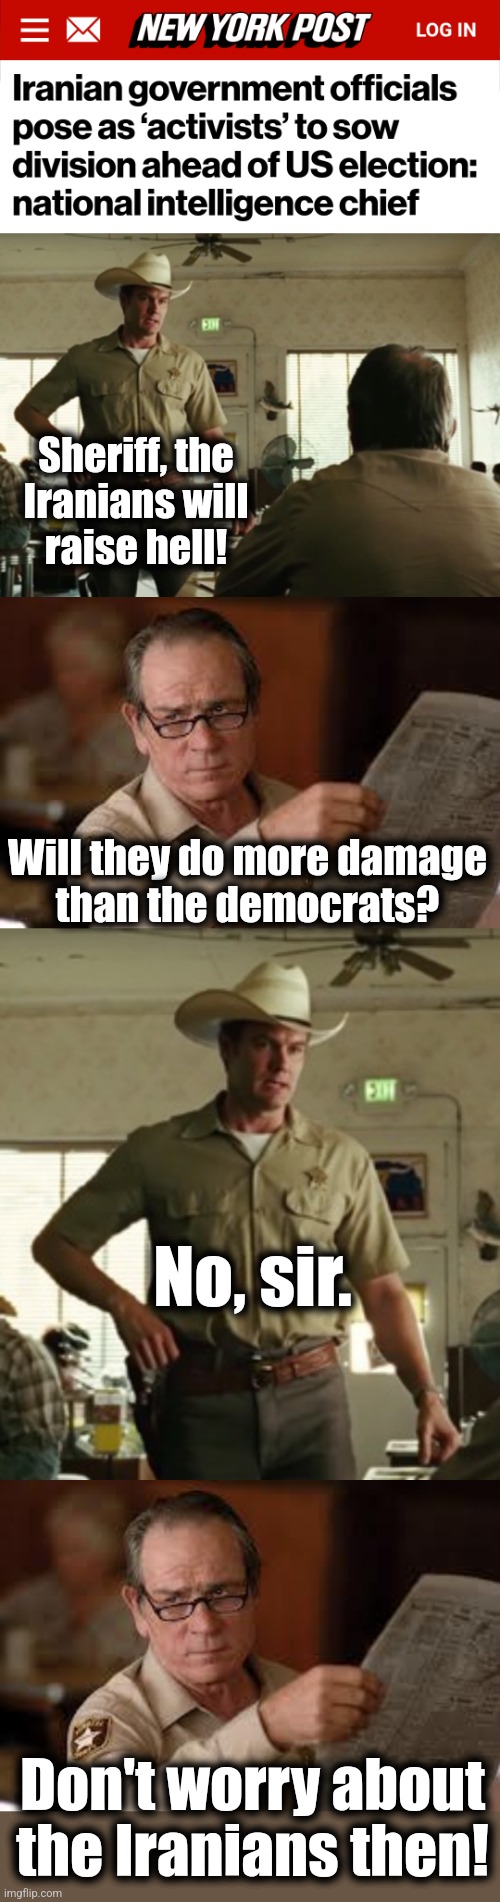 We have bigger problems | Sheriff, the
Iranians will
raise hell! Will they do more damage
than the democrats? No, sir. Don't worry about the Iranians then! | image tagged in no country for old men tommy lee jones,memes,iranians,election 2024,democrats,joe biden | made w/ Imgflip meme maker